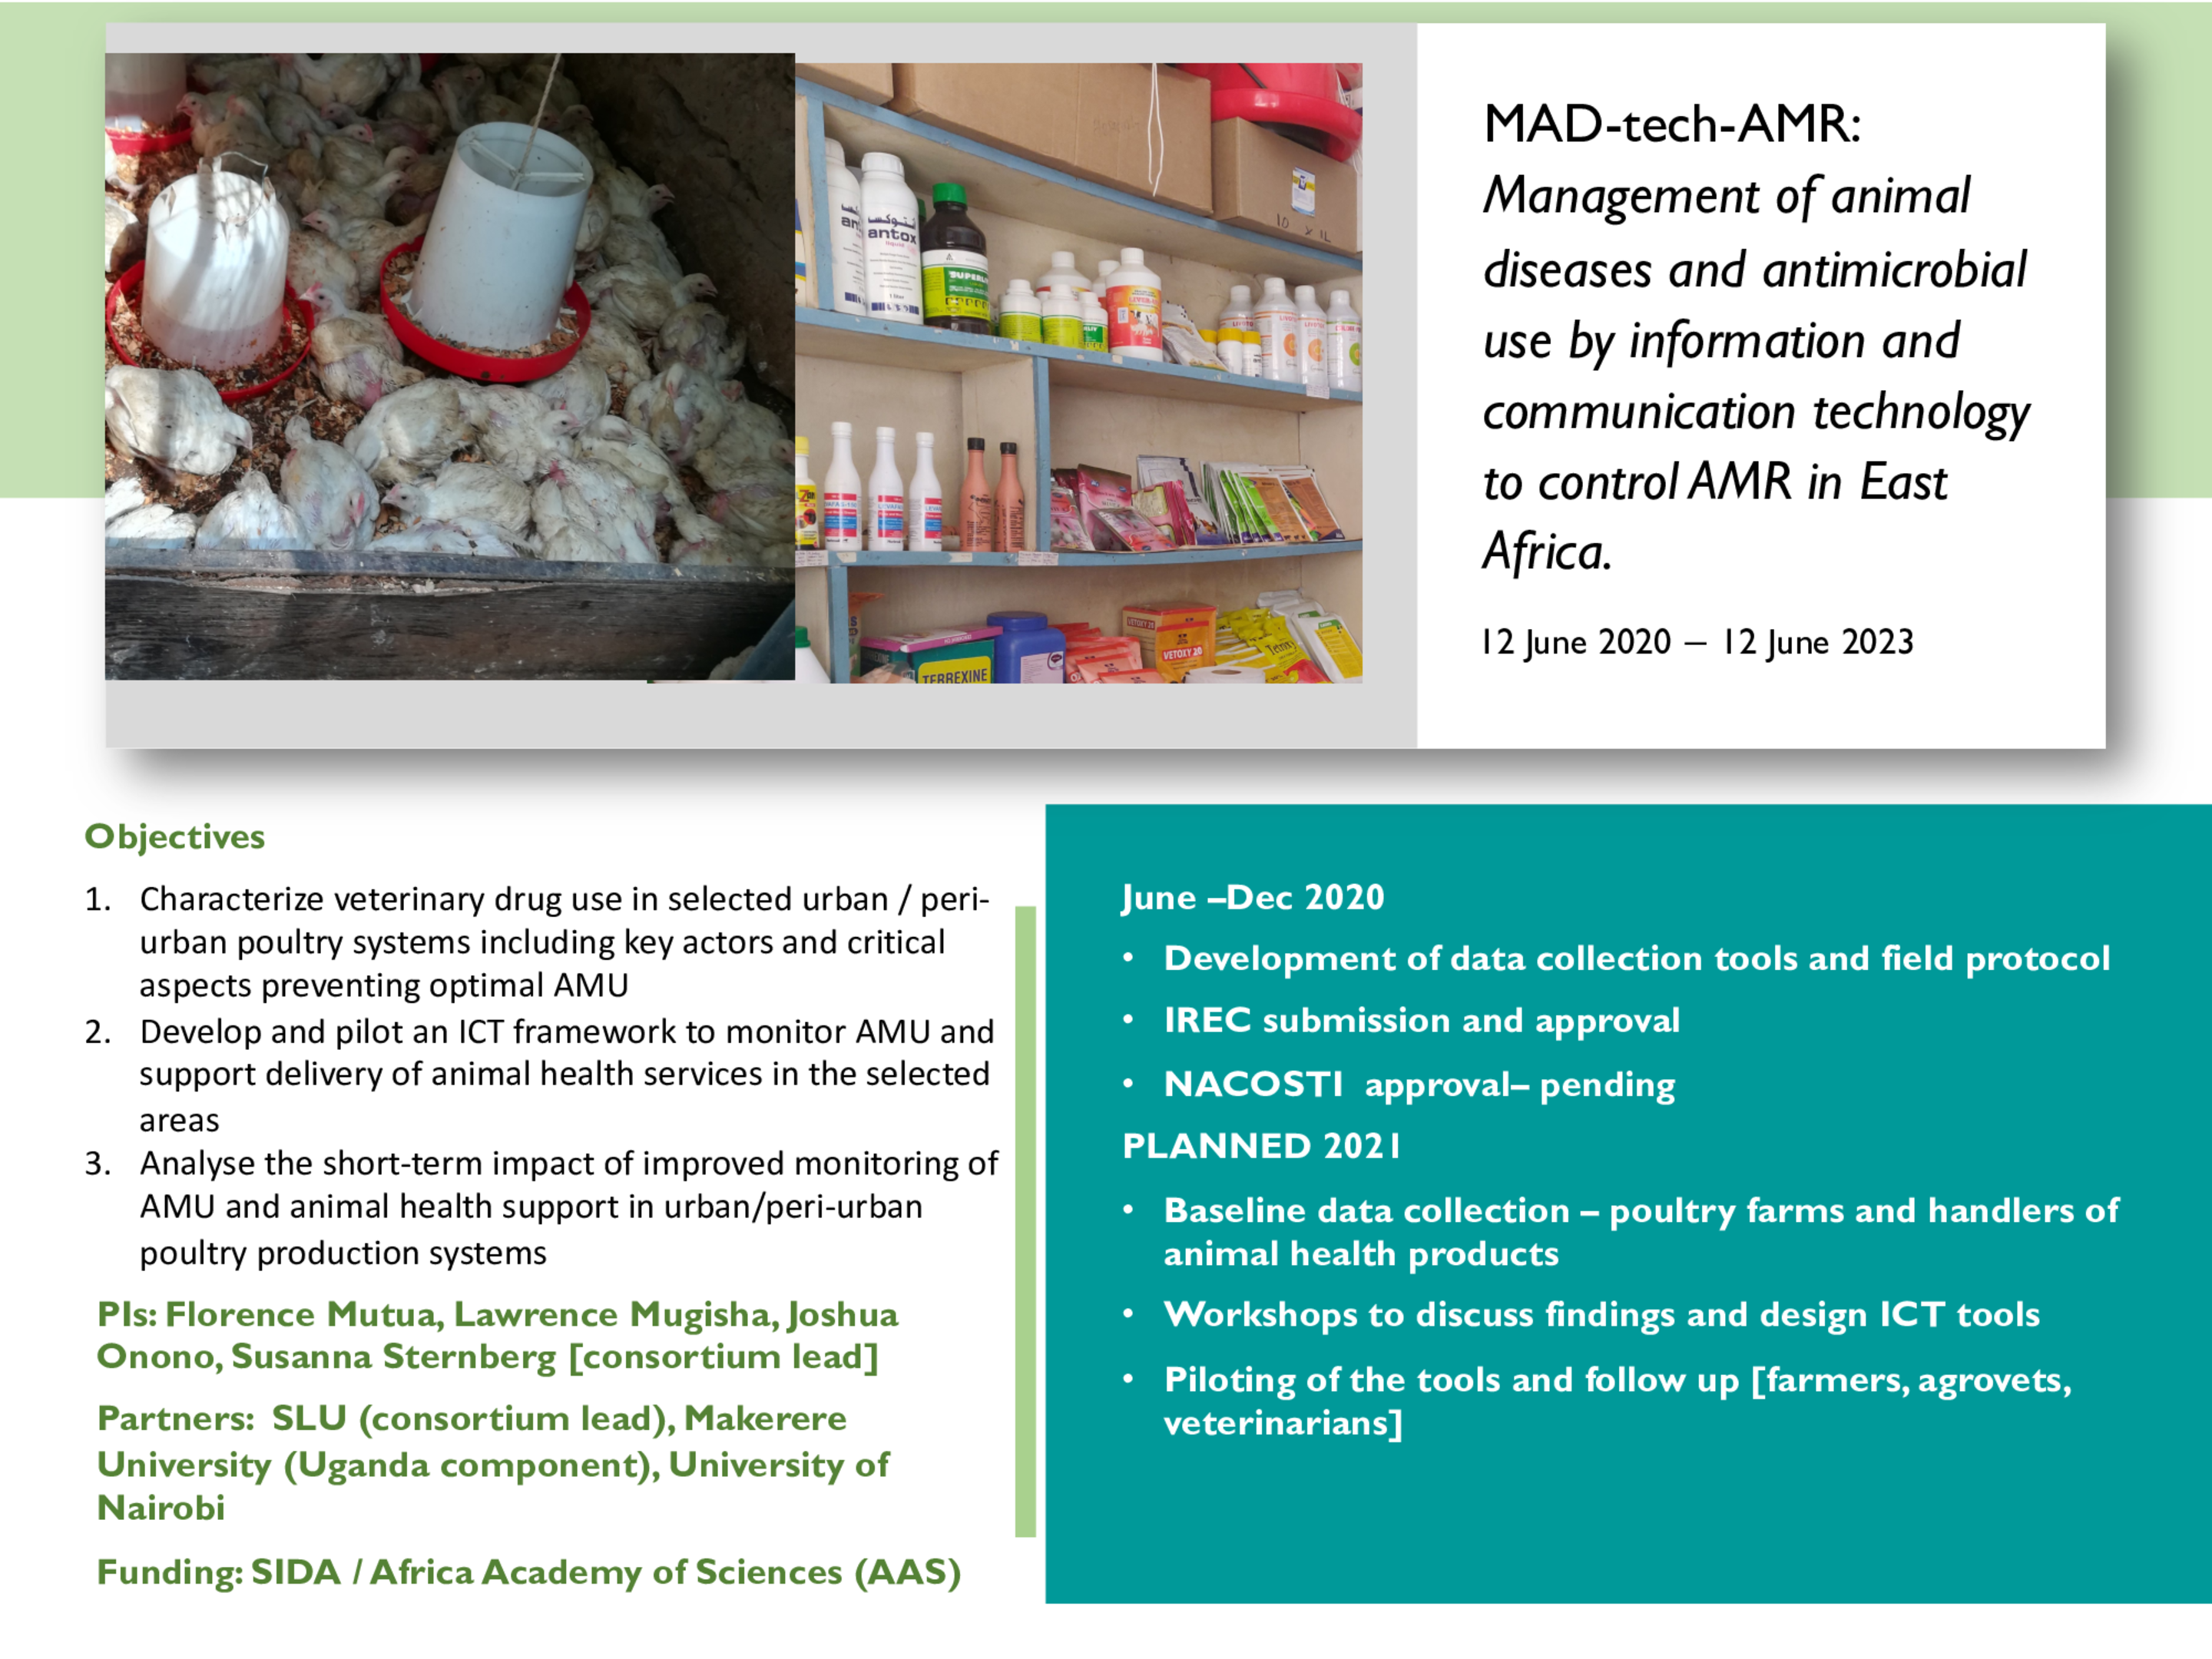 MAD-tech-AMR: Management of animal diseases and antimicrobial use by information and communication technology to control AMR in East Africa.